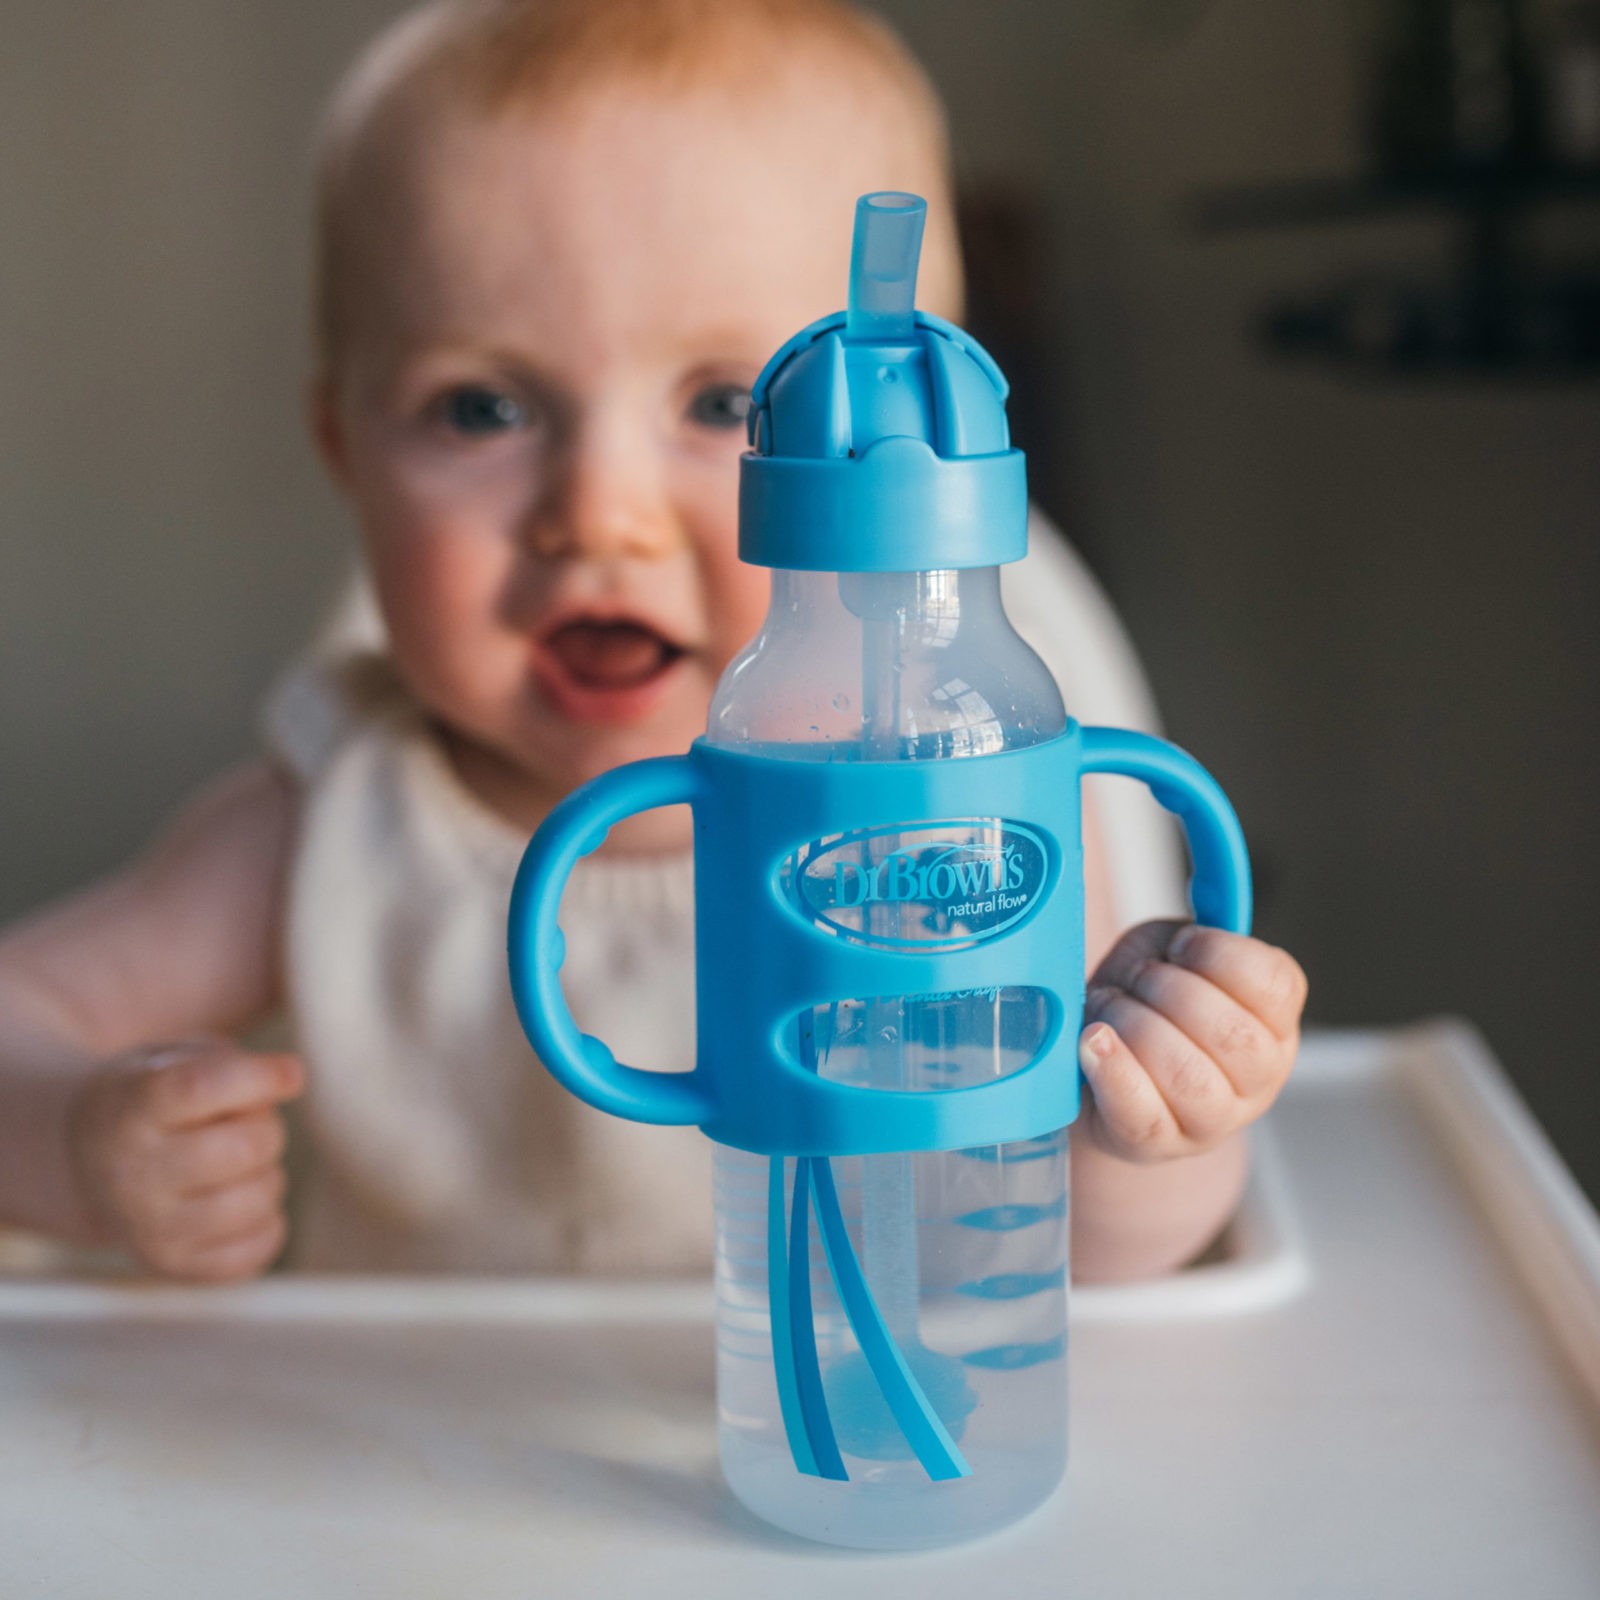 Baby in high chair holding silicone handle on blue sippy straw bottle